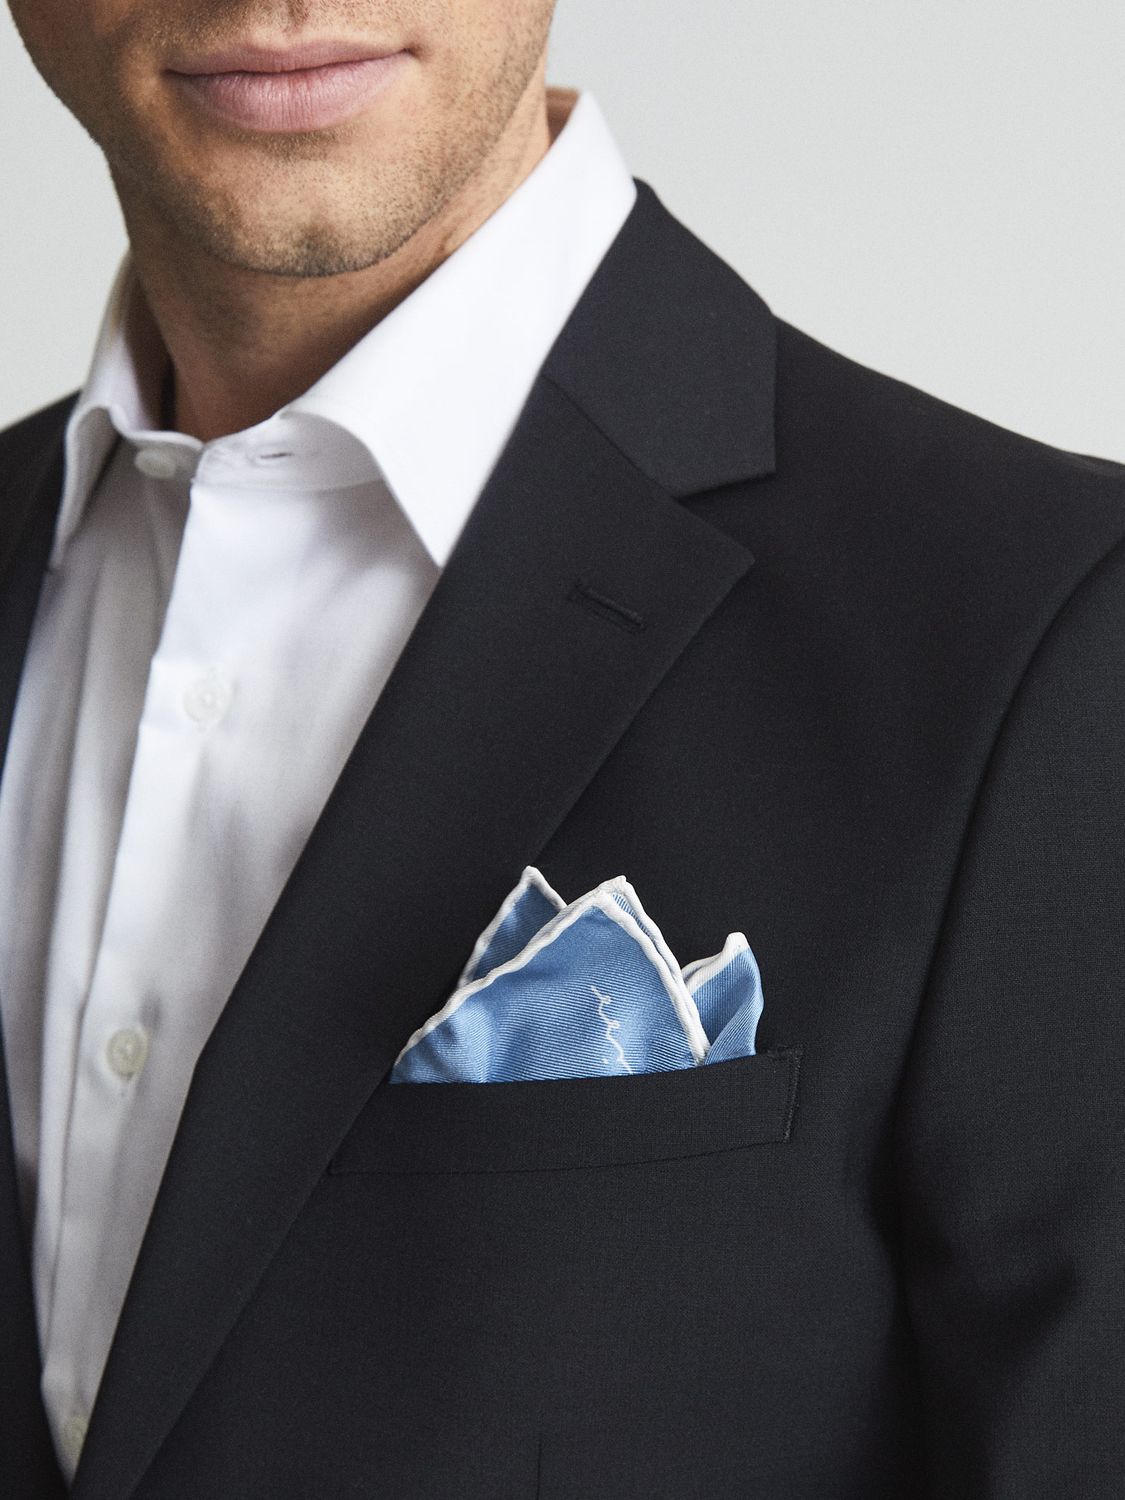 Reiss Ceremony Silk Pocket Square, Airforce Blue at John Lewis & Partners